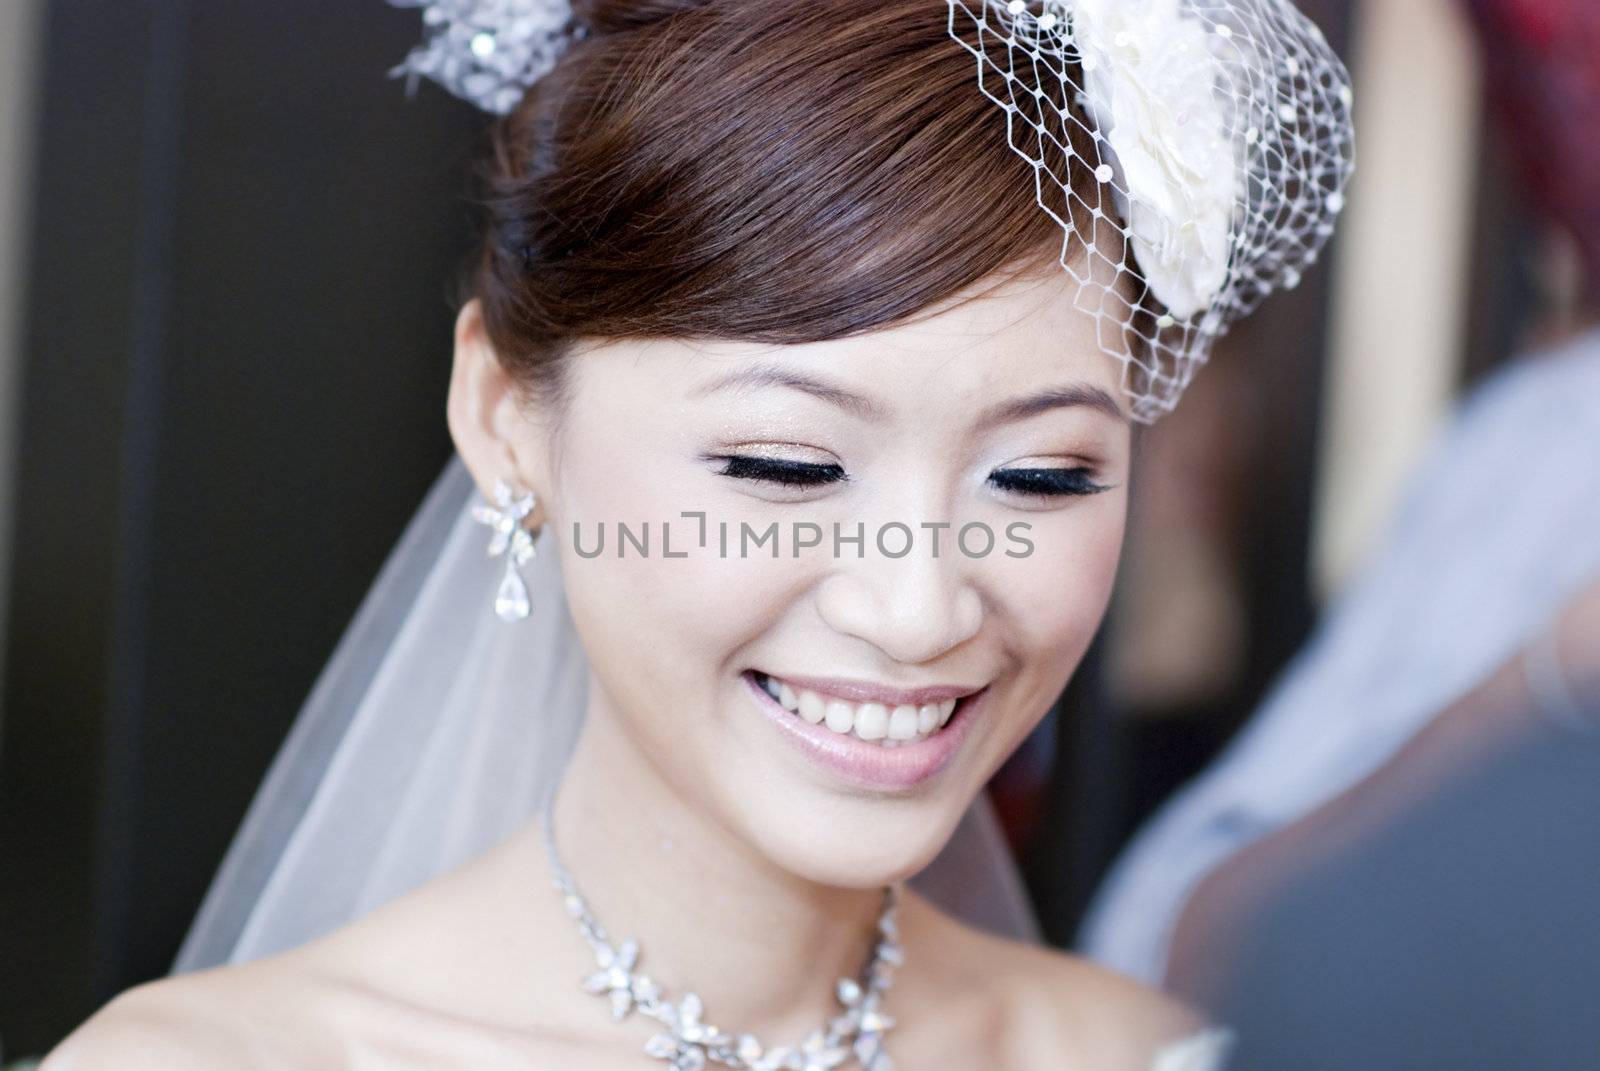 Candid moment of beautiful Asian bride smiling